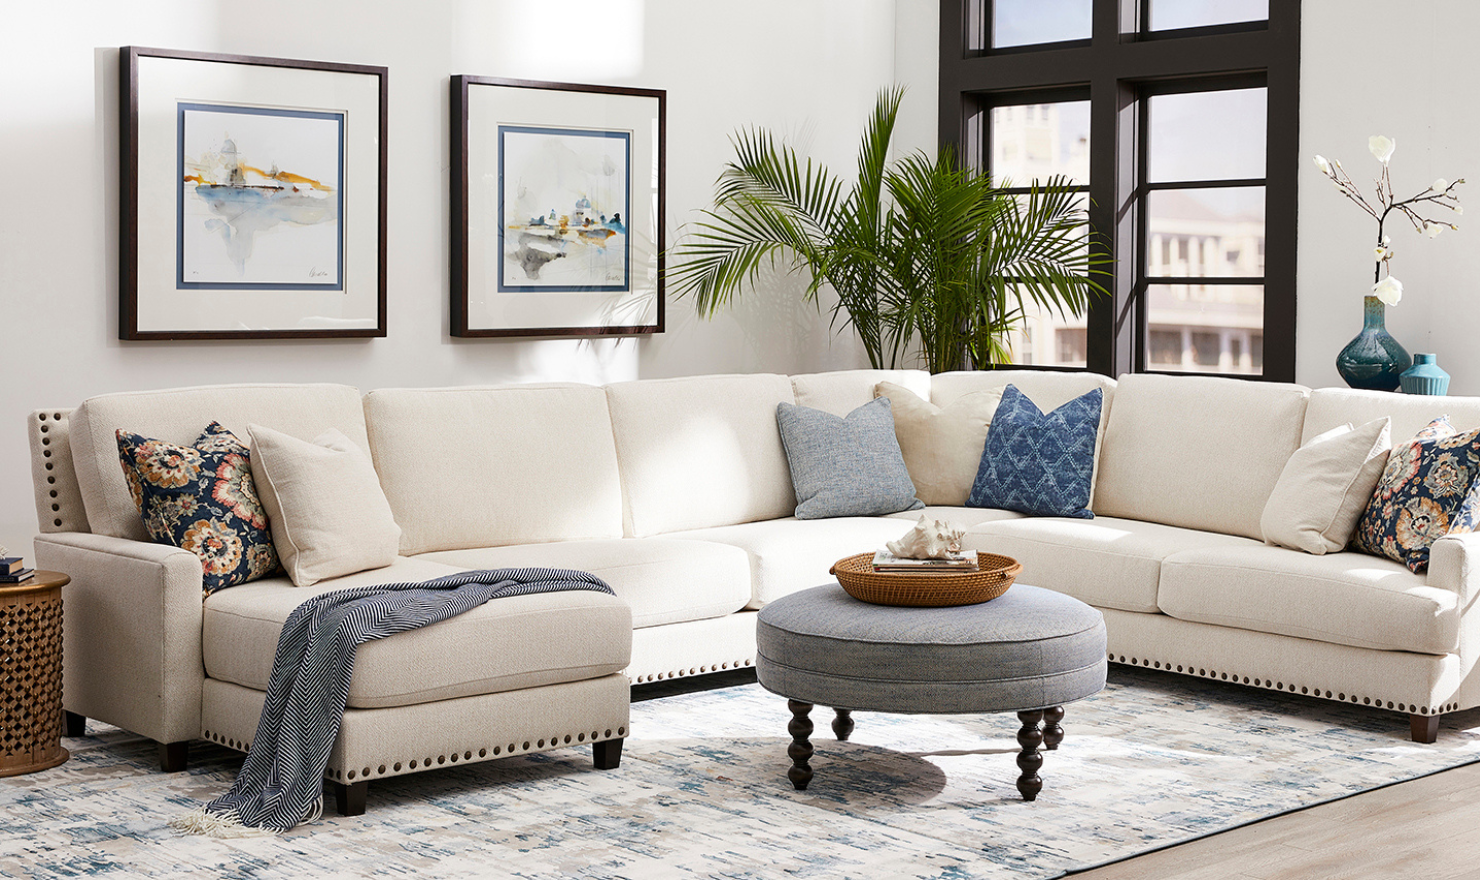 Arrange the sleeper sectional sofa in a functional and visually appealing way